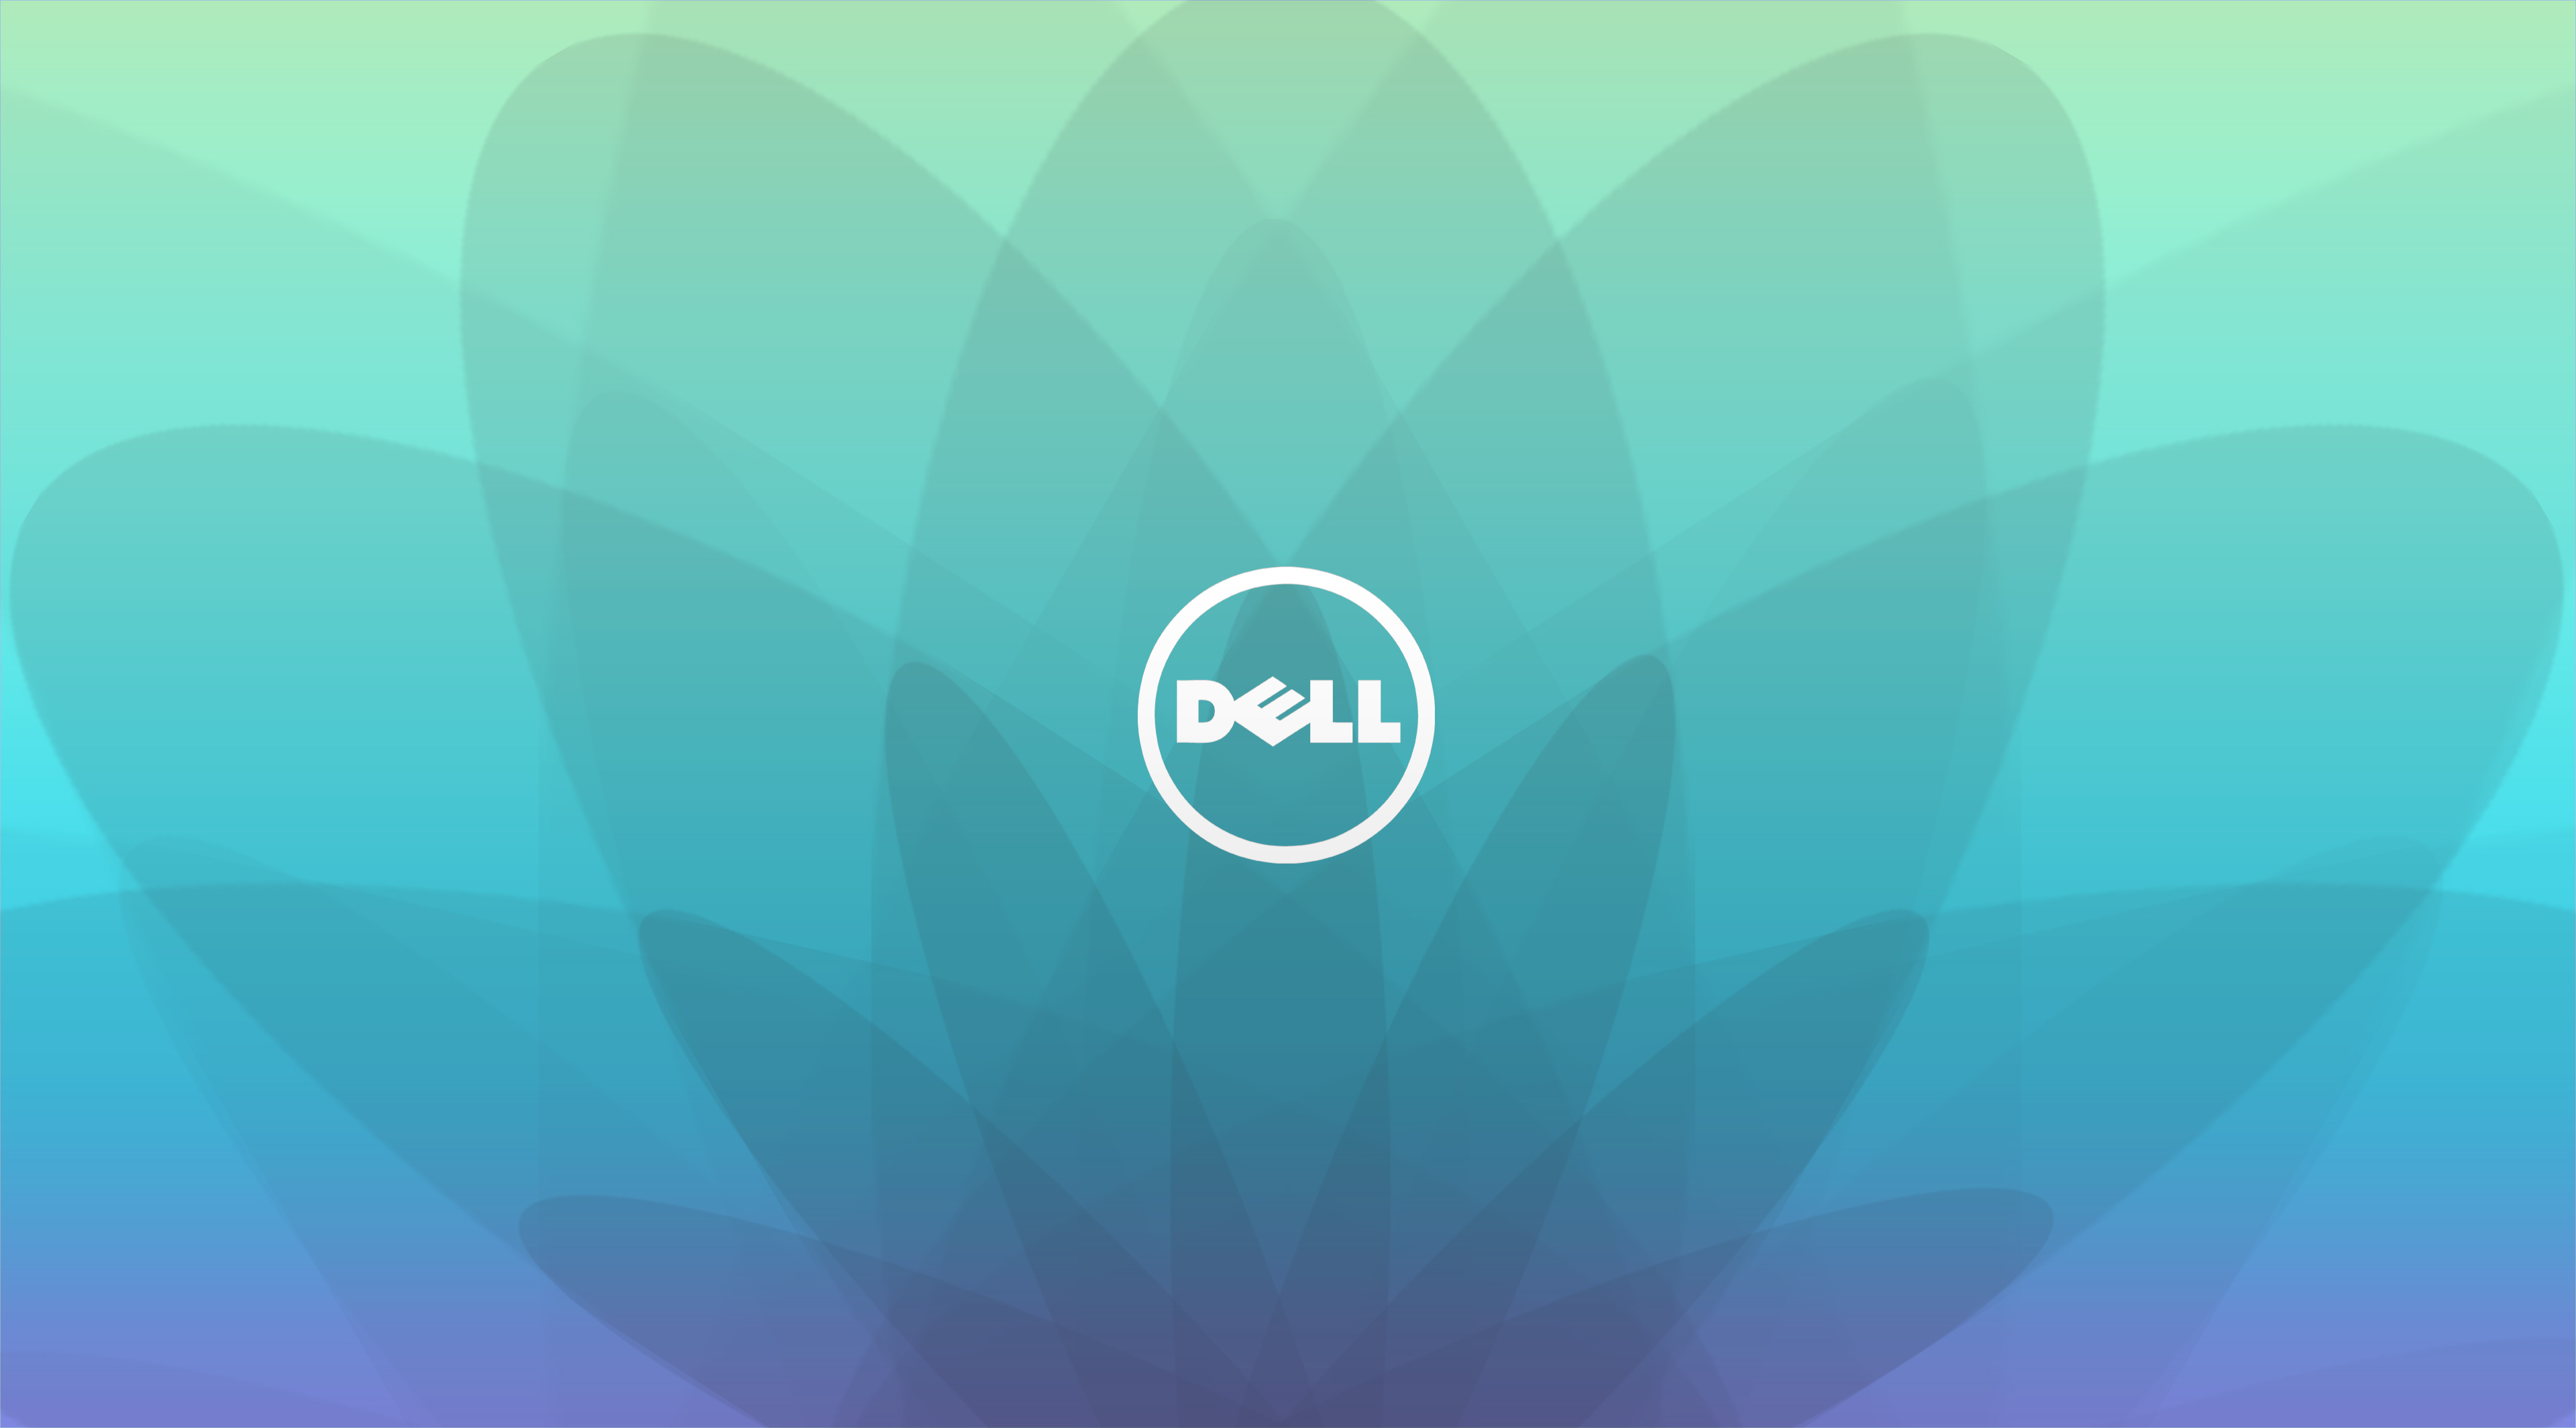 Dell Windows 10 Wallpapers - Wallpaper Cave